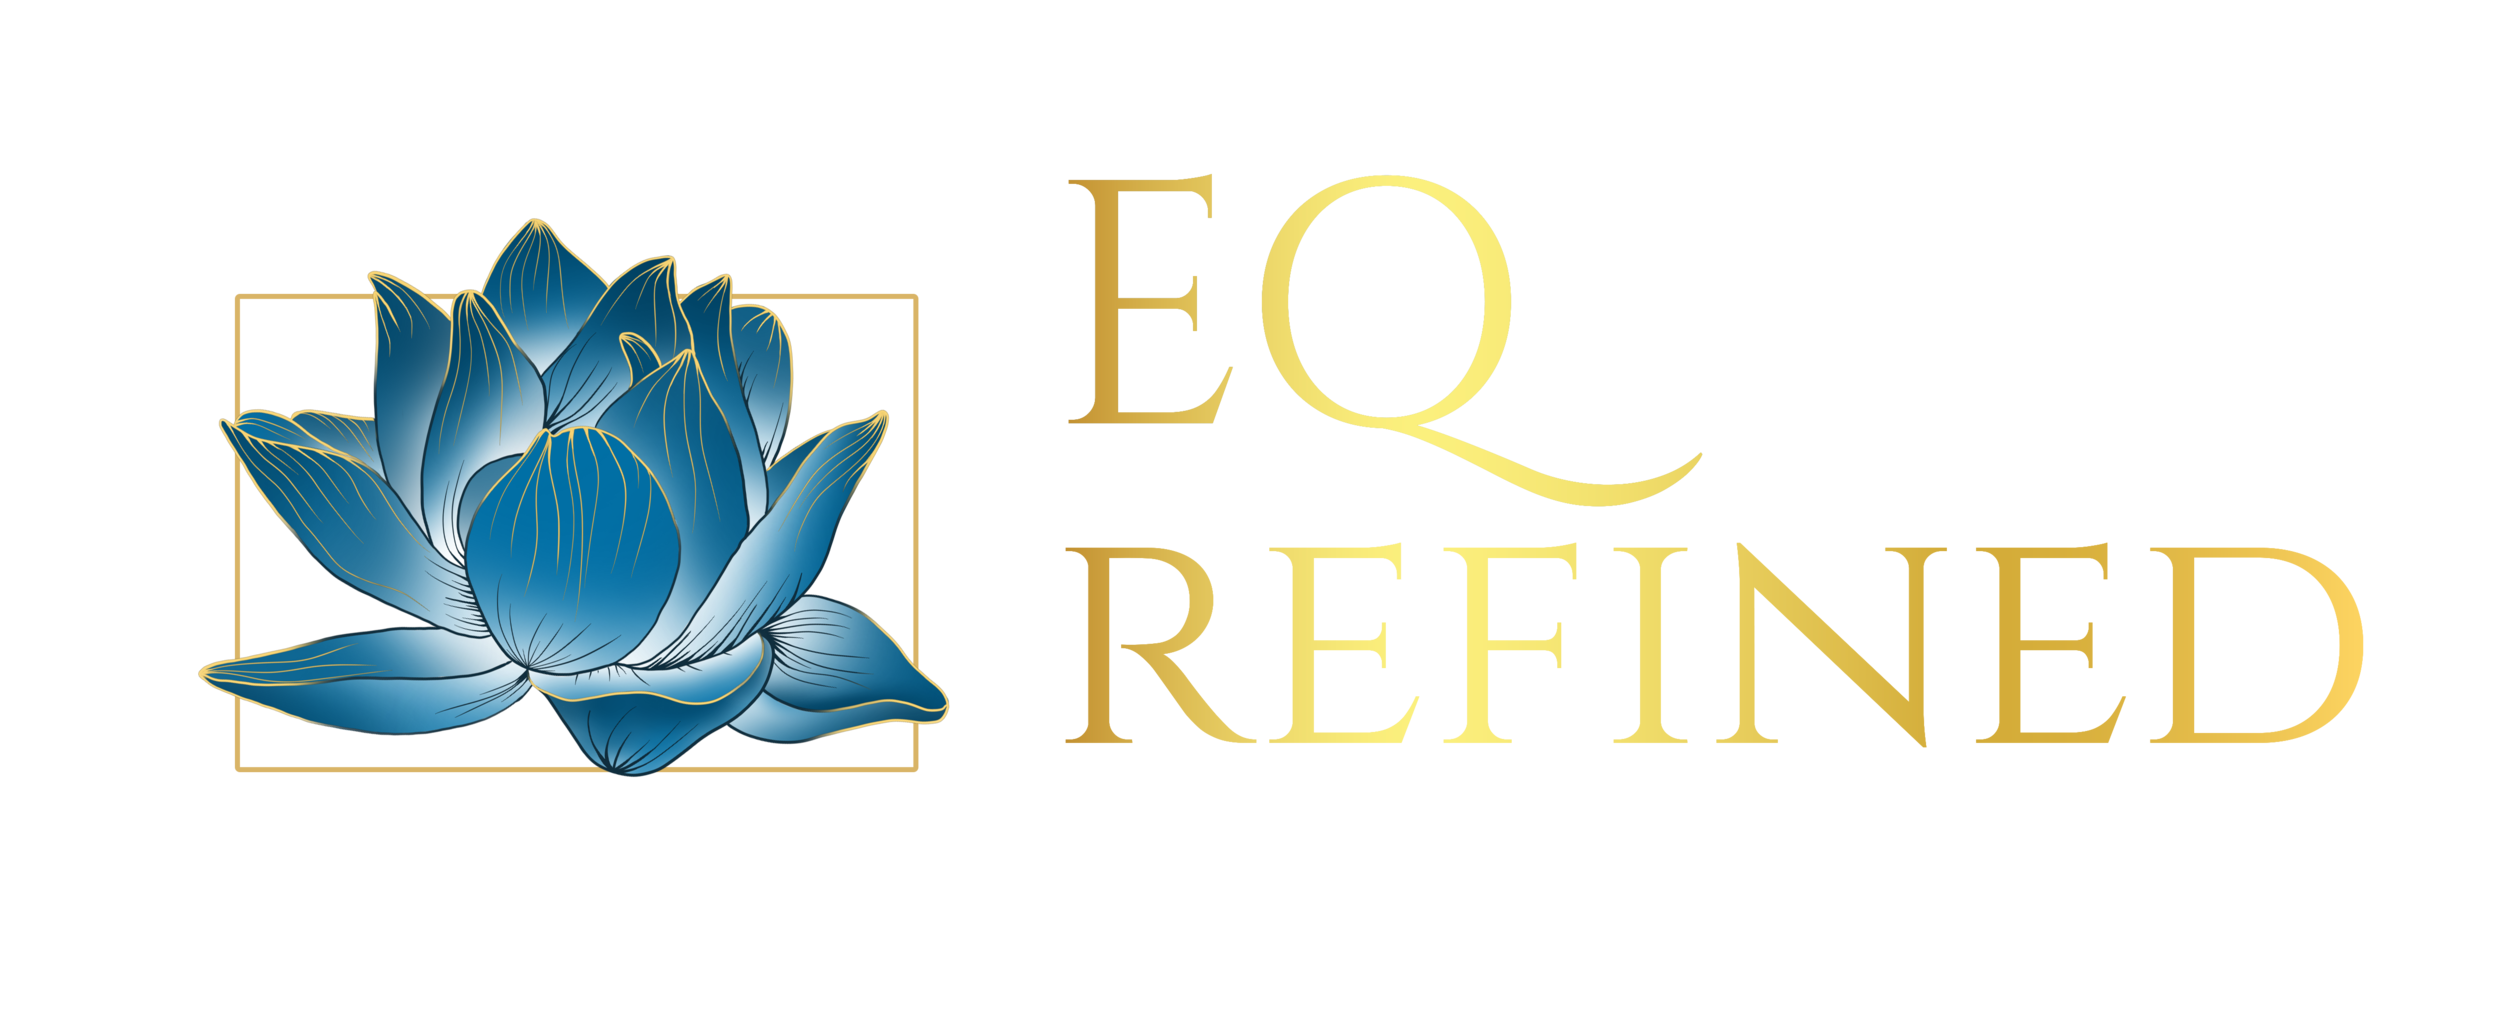 Luz Gonzalez from EQ Refined Headshot Photo at Small Business Expo